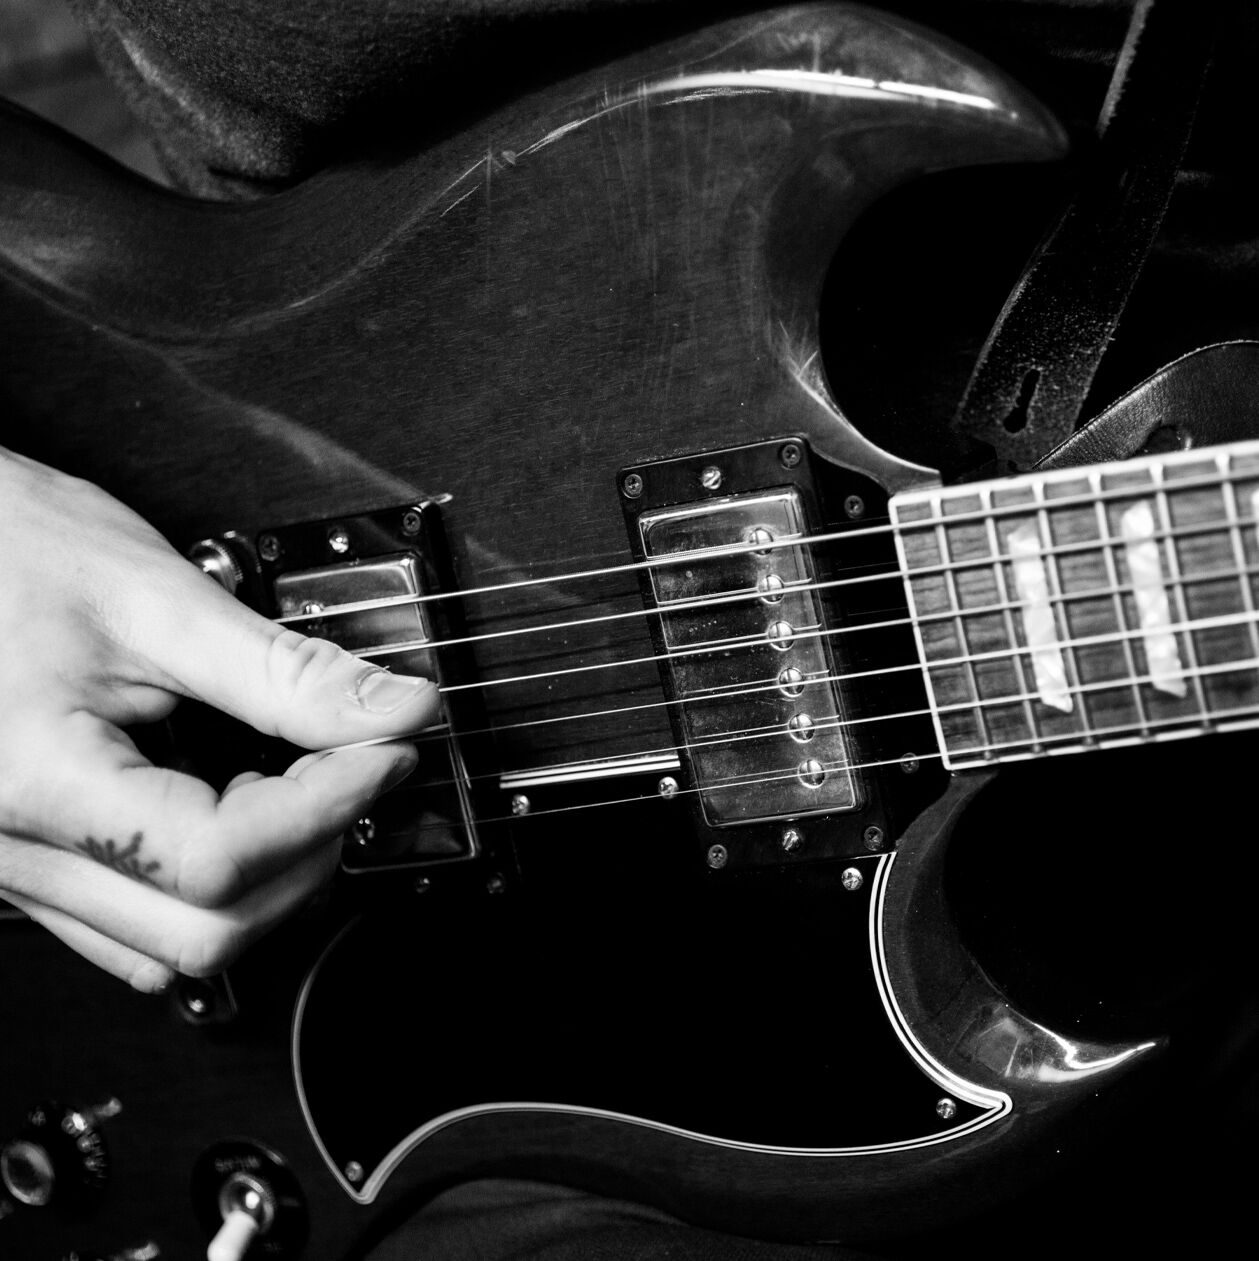 Black and white photo of a person playing an electric guitar